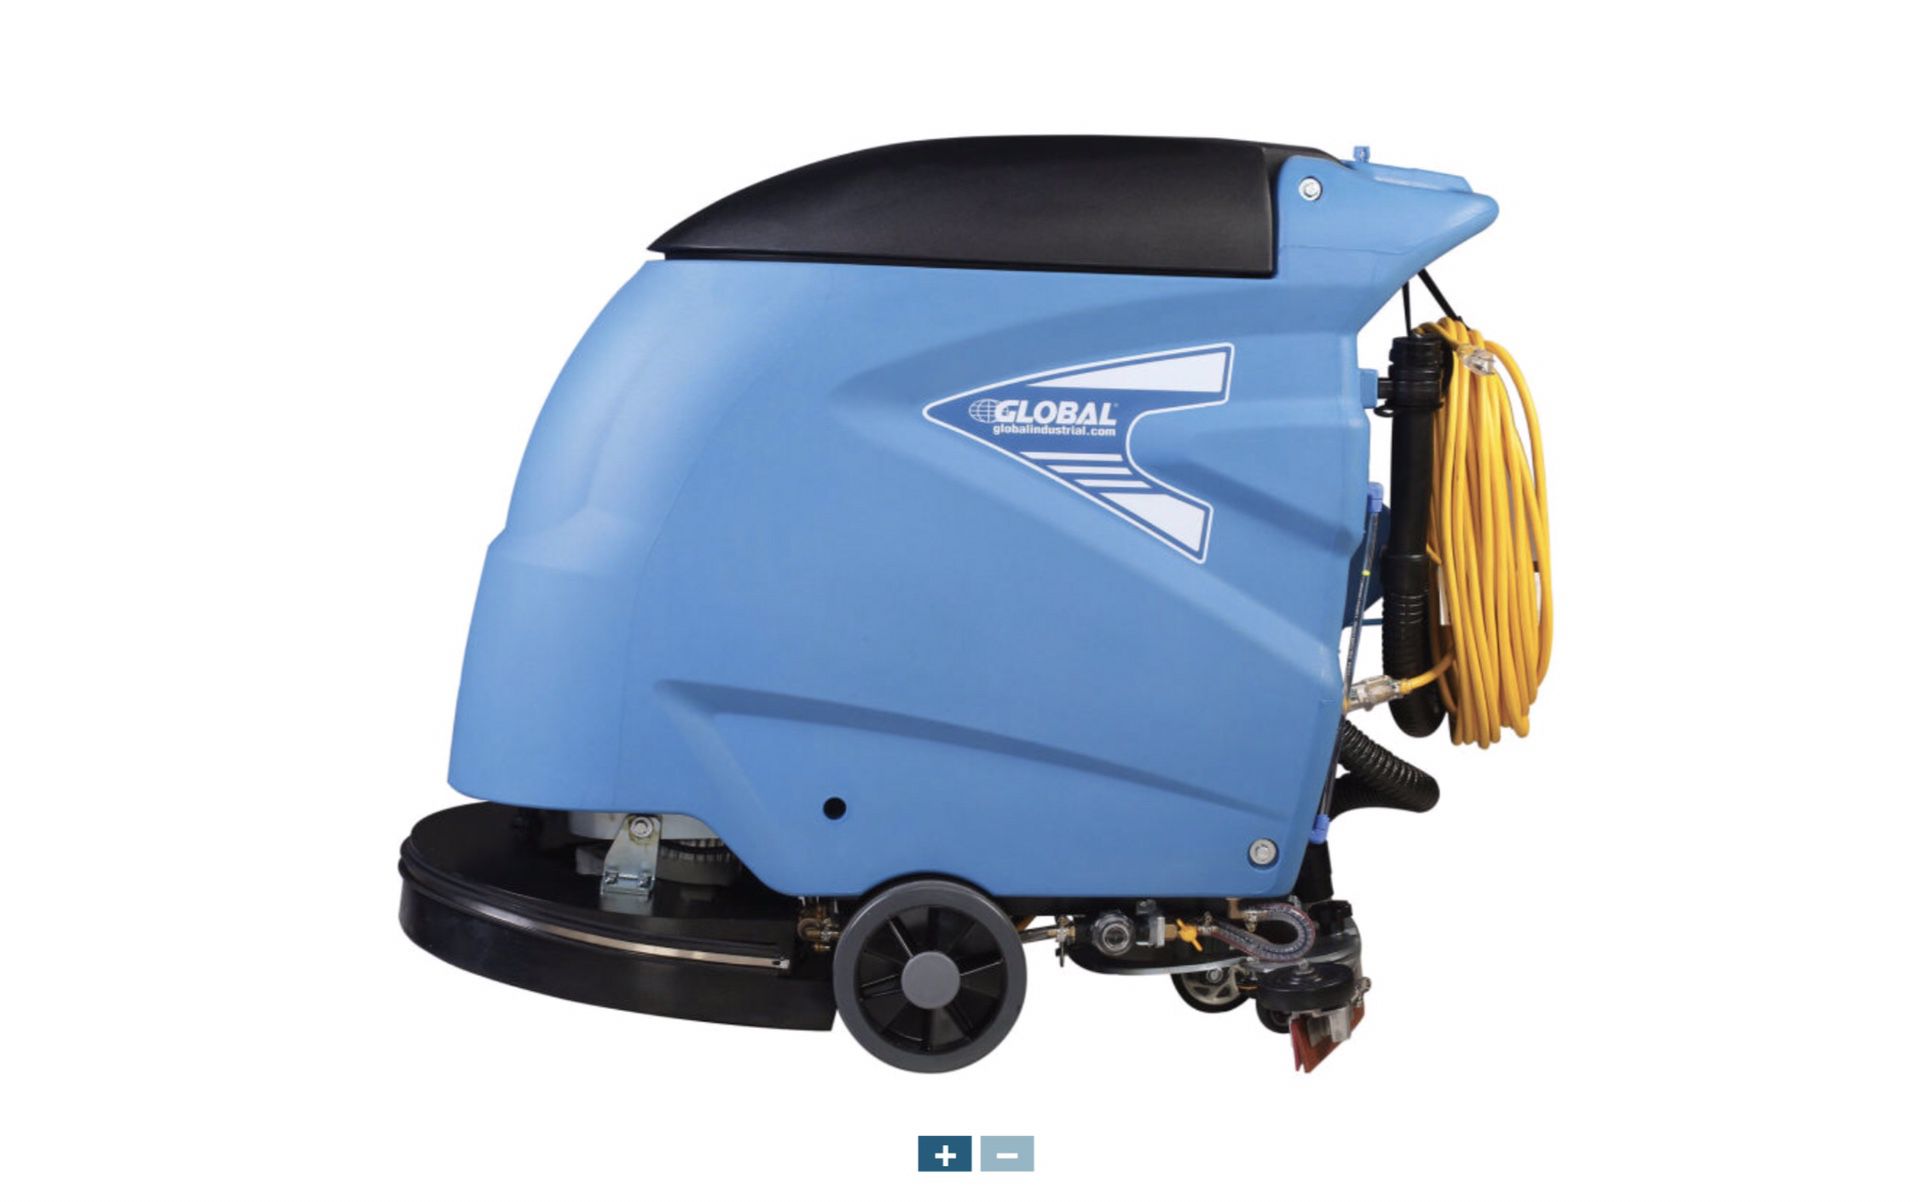 20” Electric Auto Floor Scrubber with warranty bought December 2019